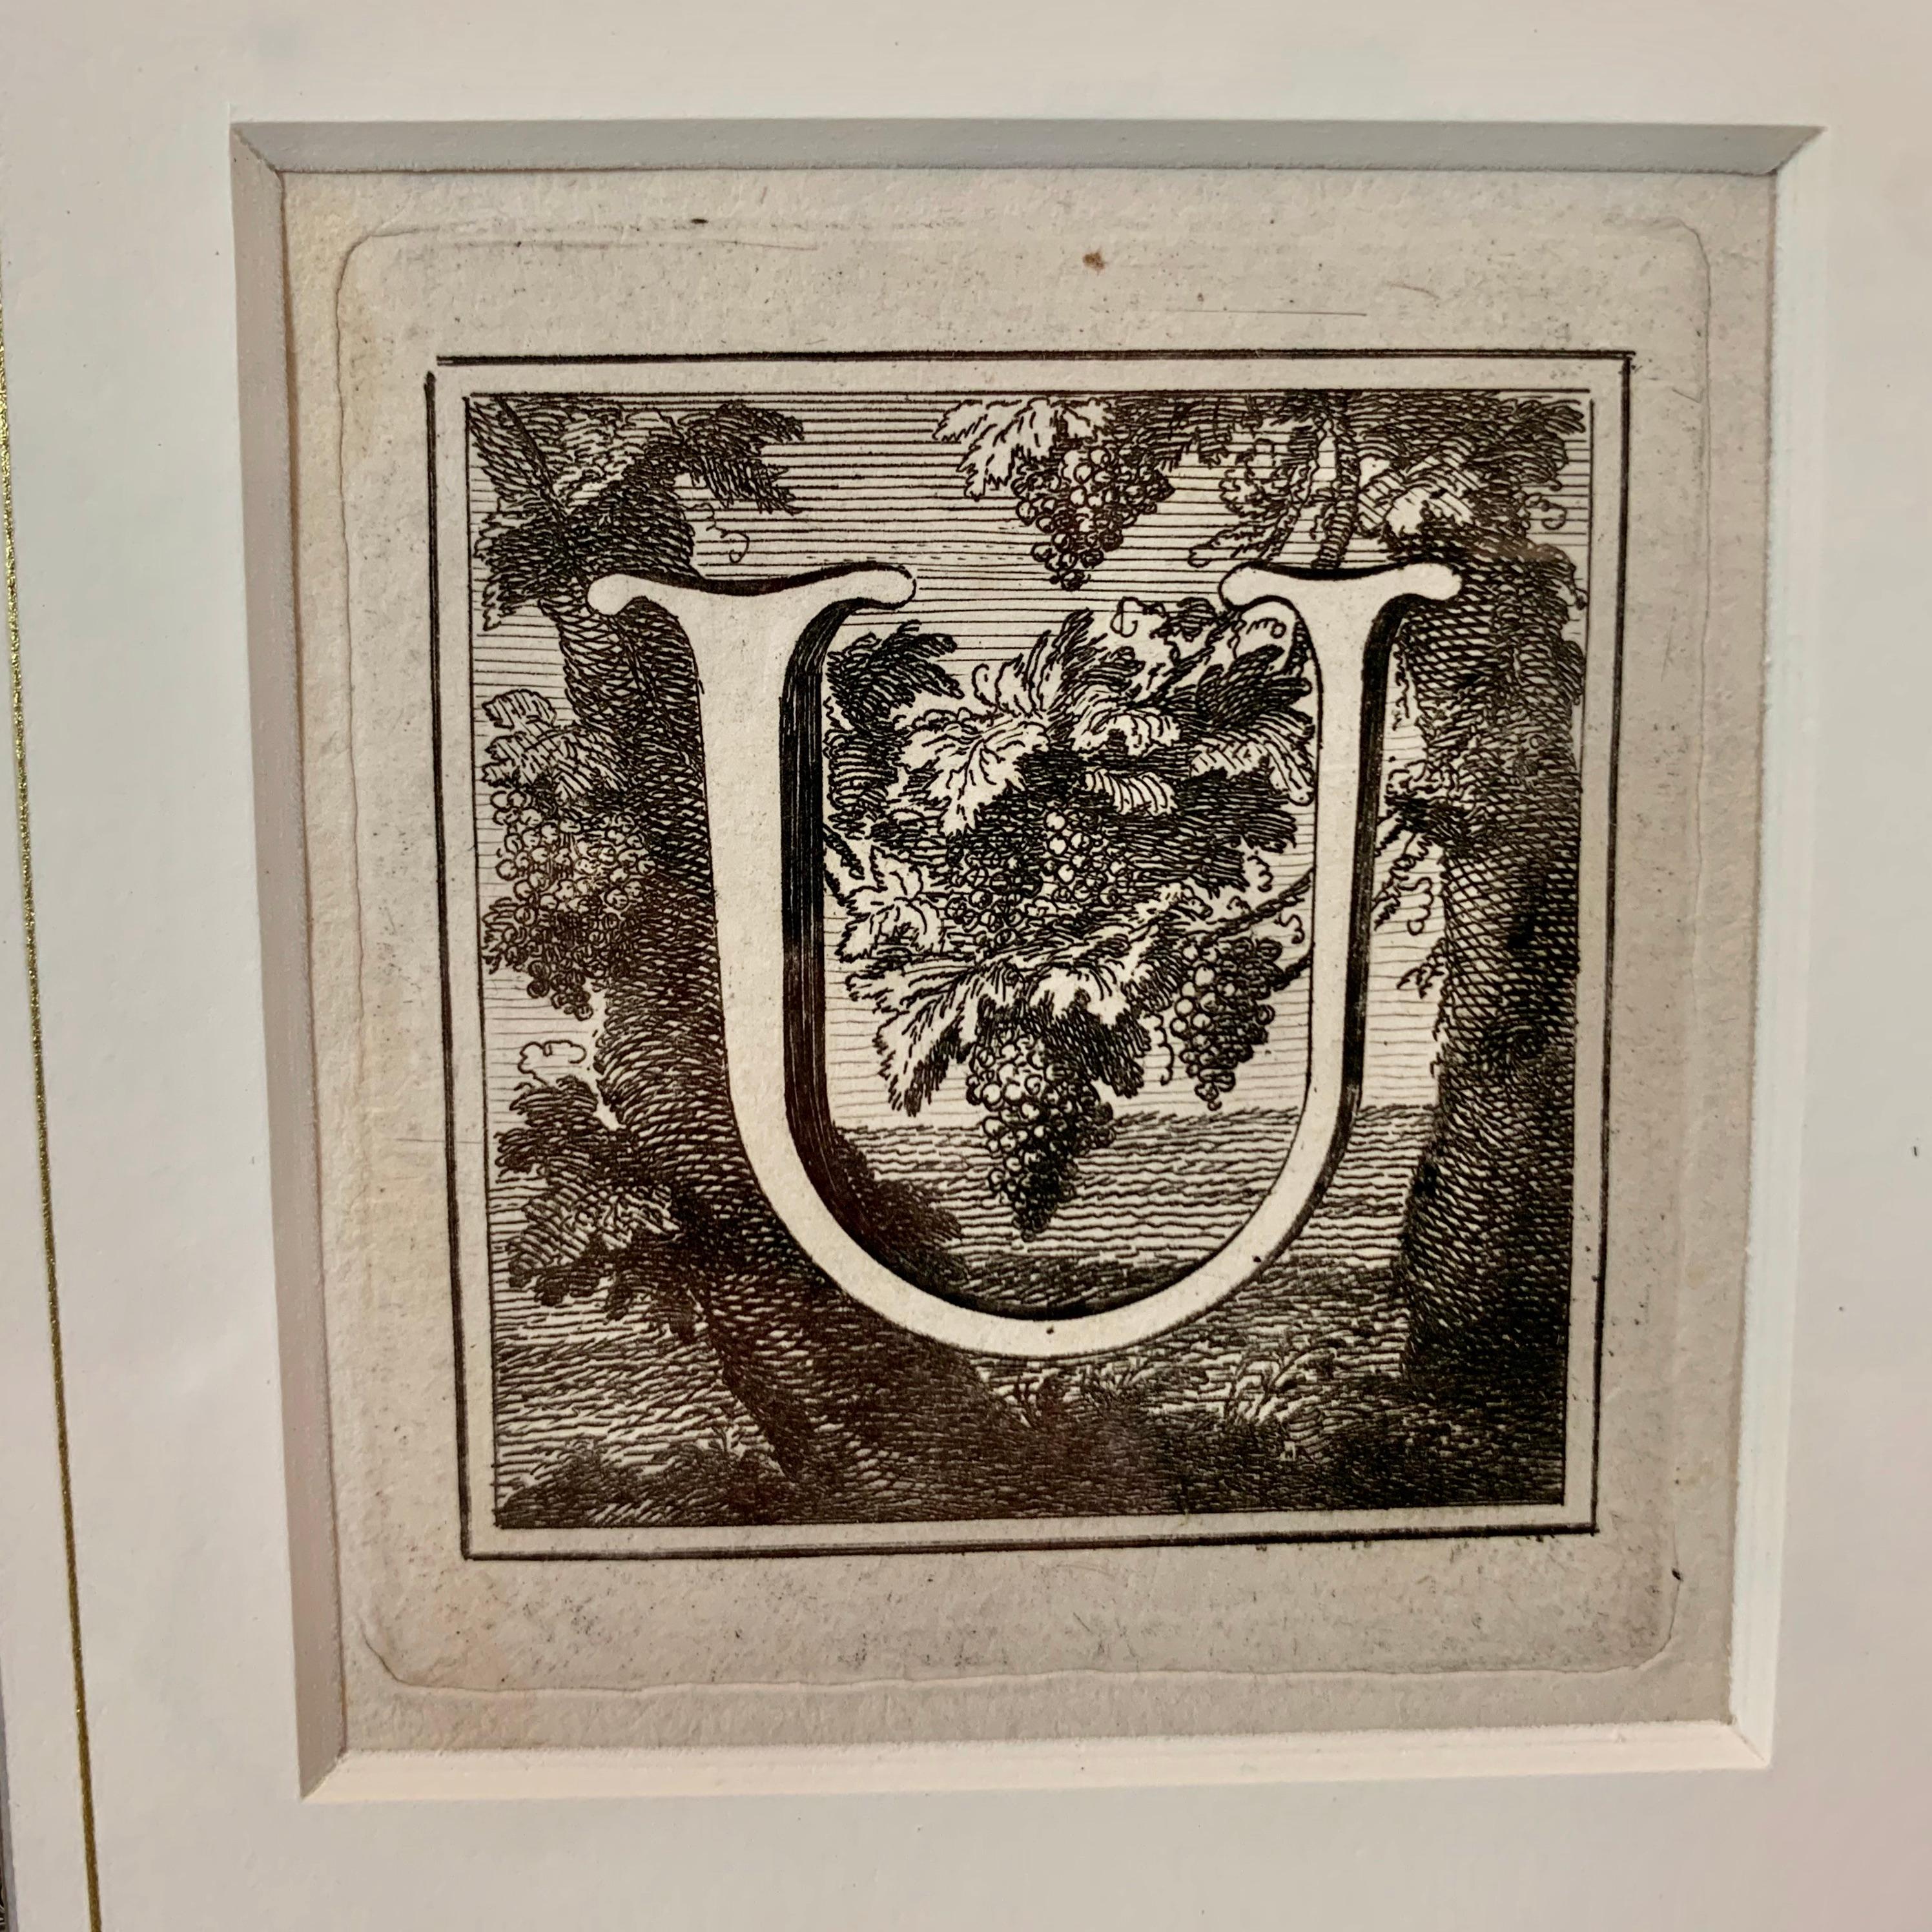 Hand-Crafted Engraving of the Letter 